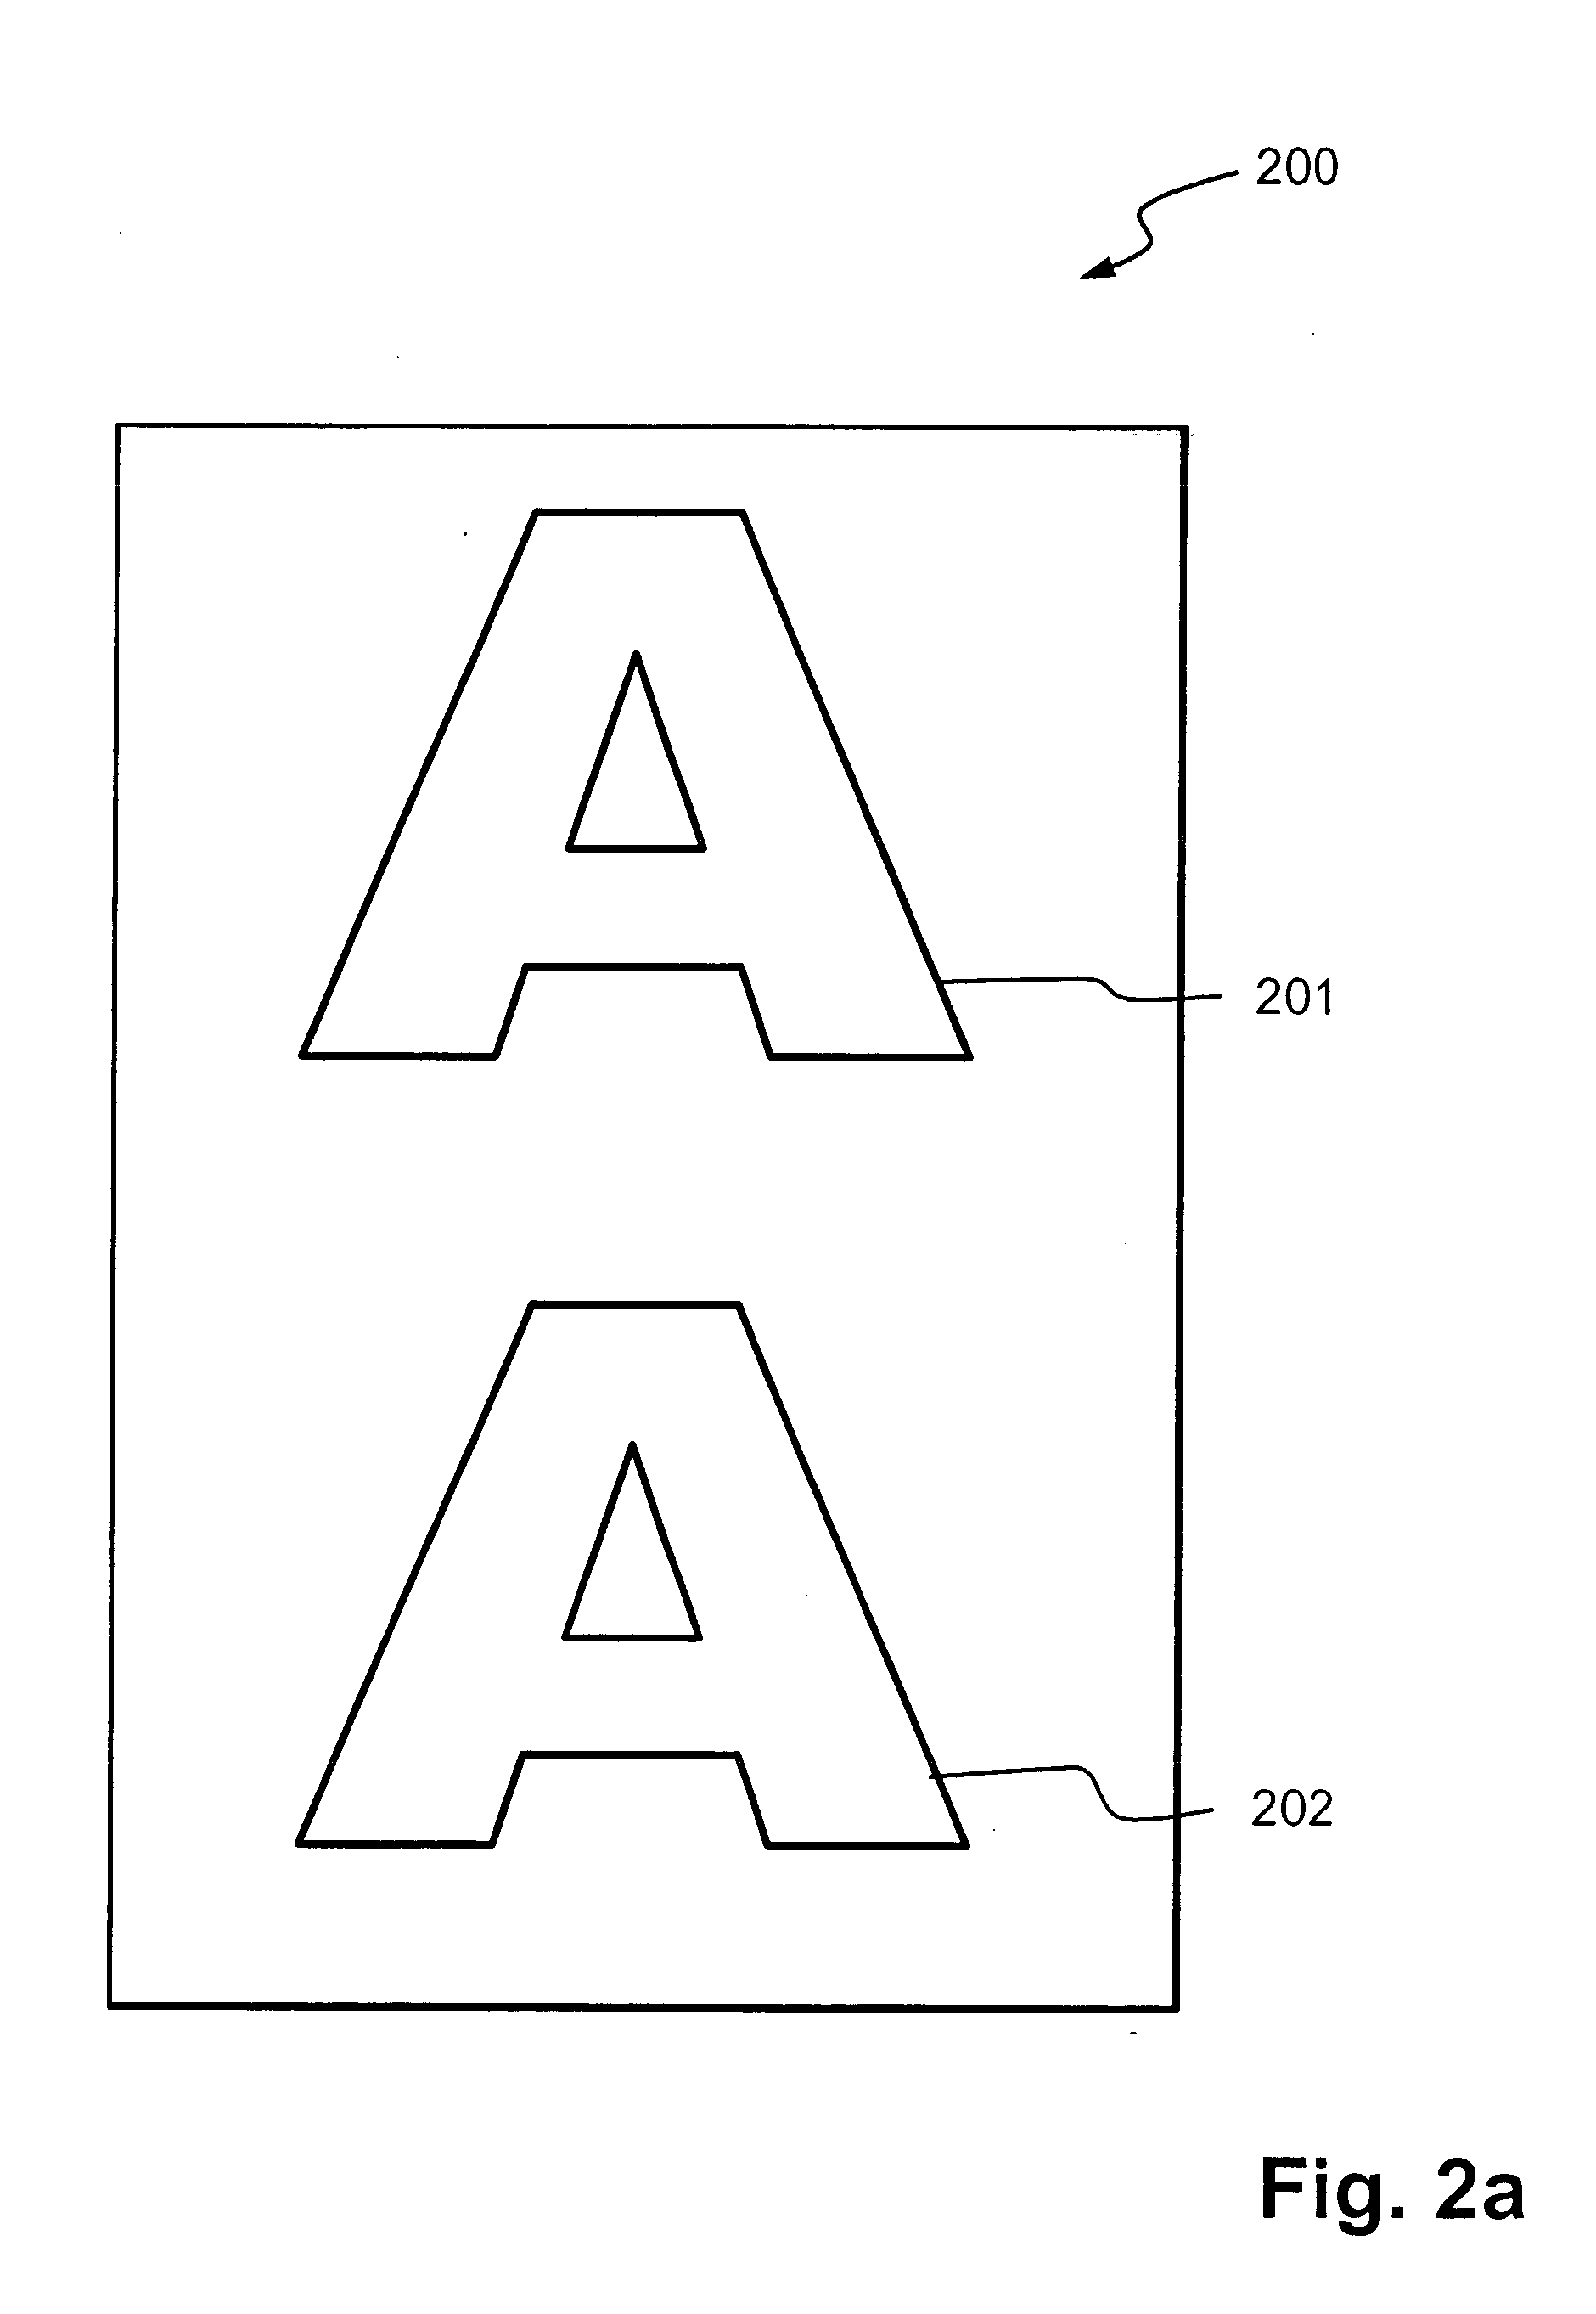 Method for generating a display list